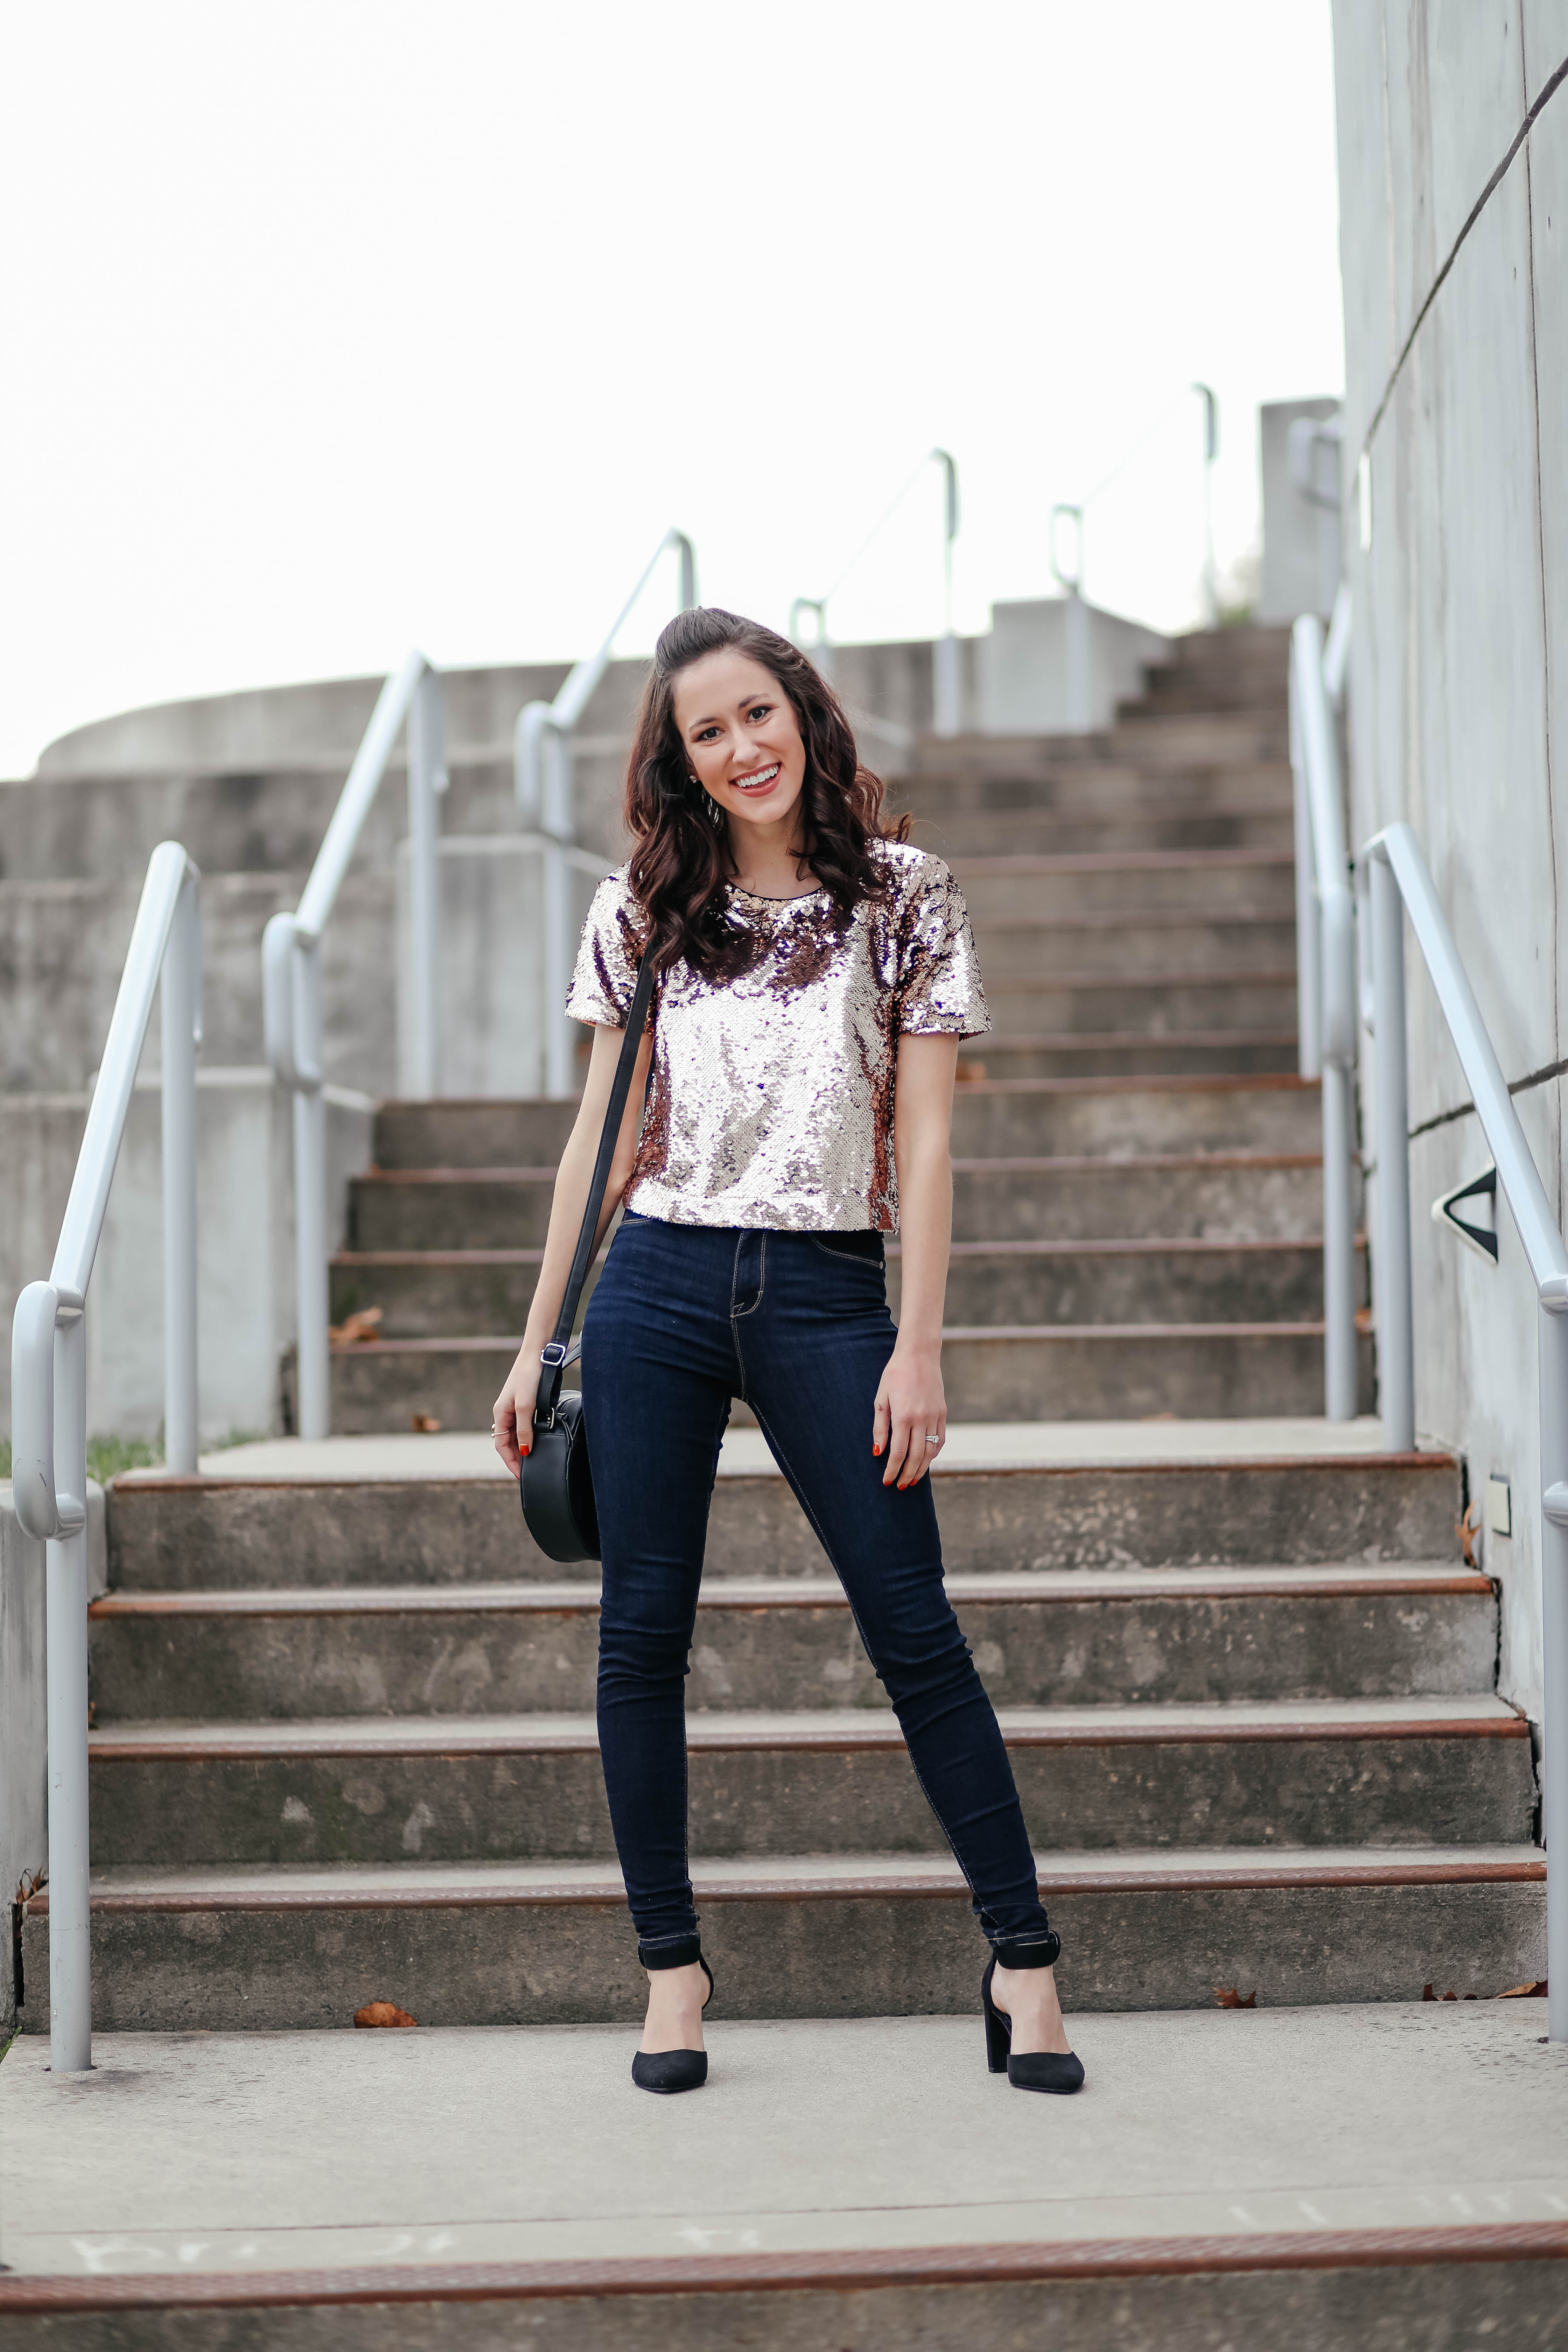 TWO Ways to Wear Sequins for the Holidays - Affordable Holiday Looks from Walmart on Coming Up Roses